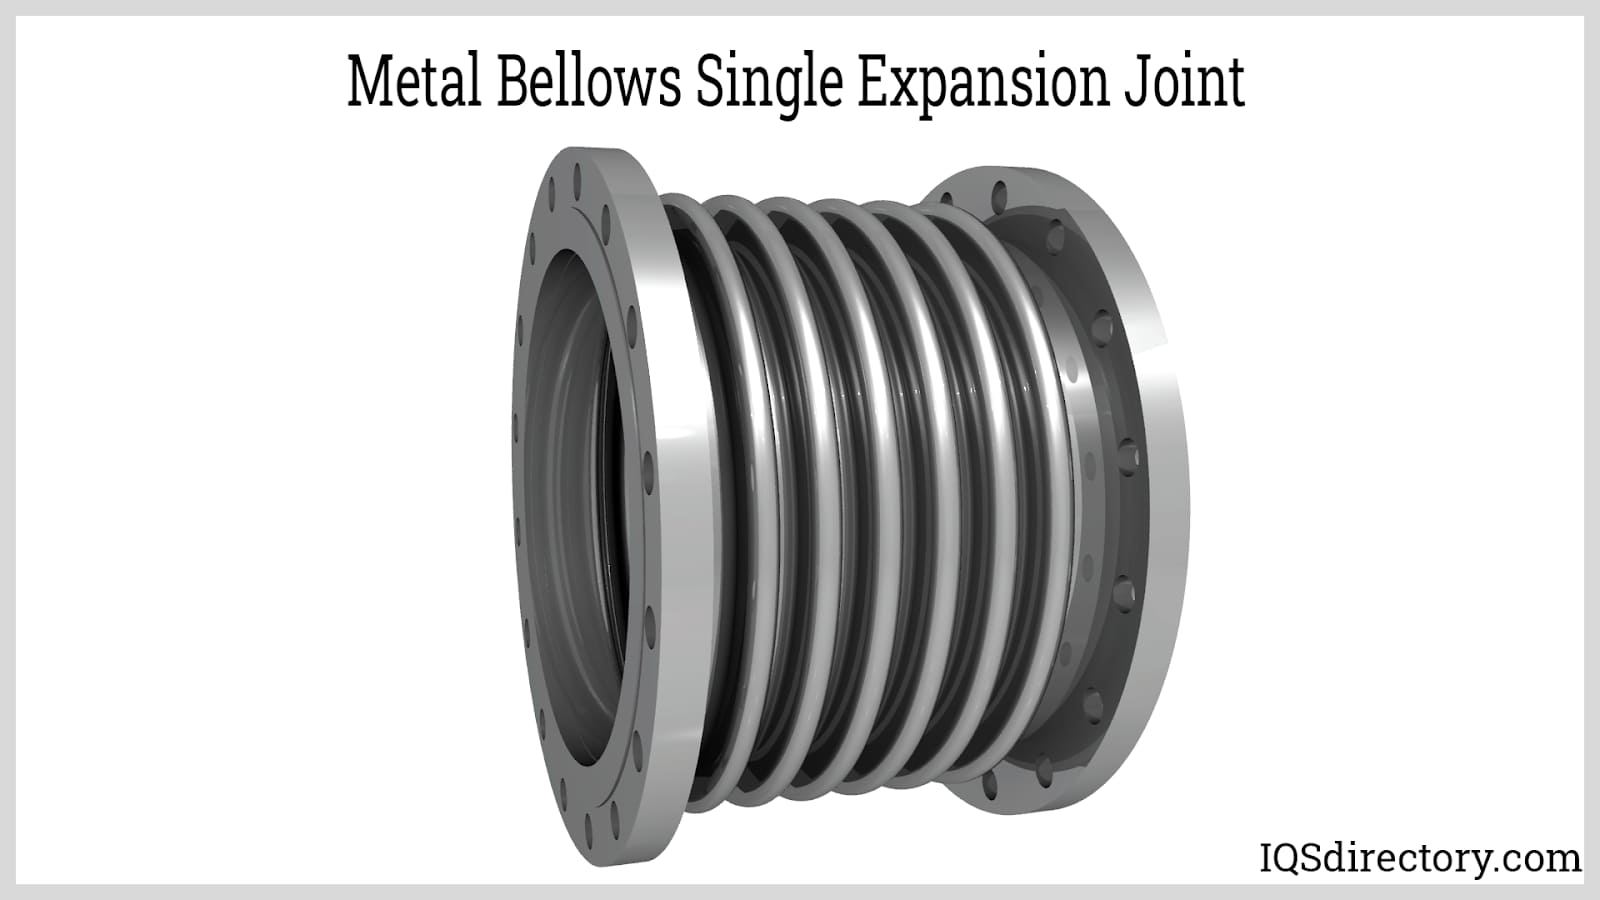 Metal Bellows Single Expansion Joint